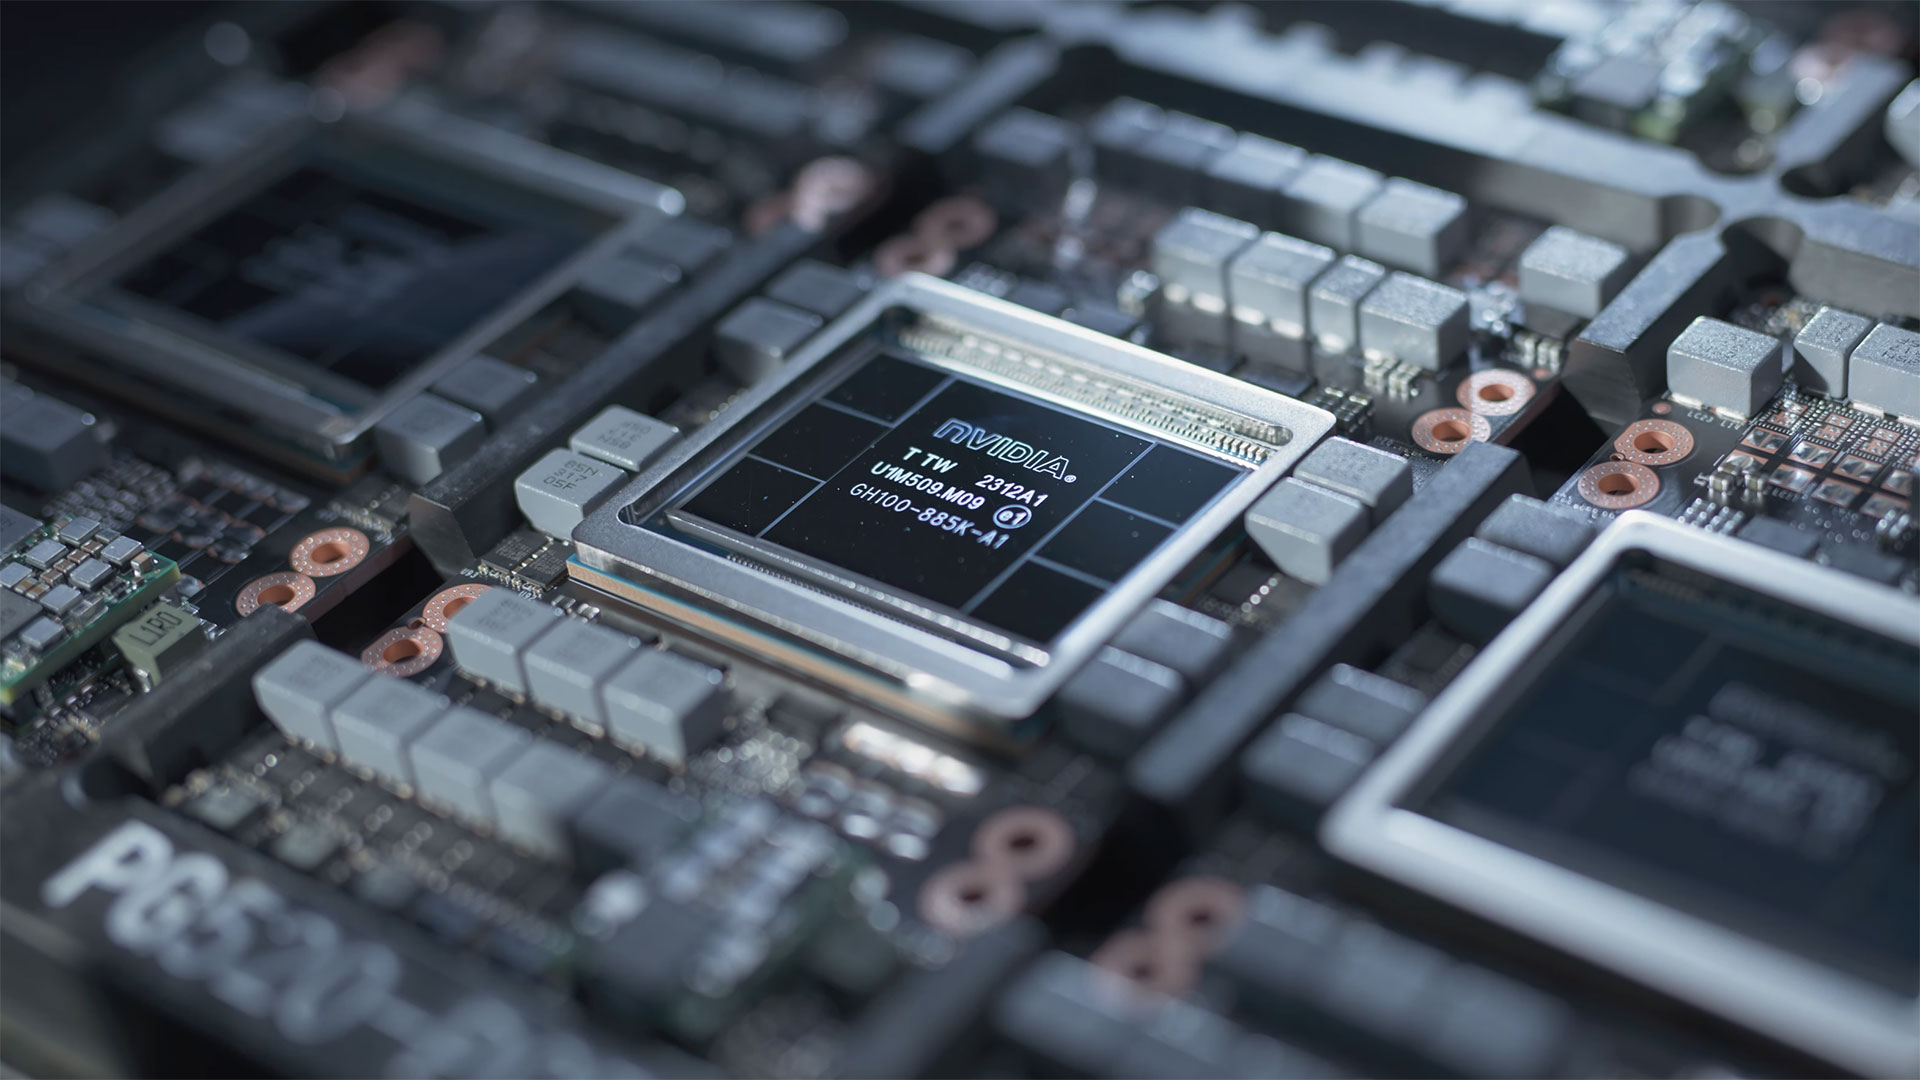 Nvidia's next-gen AI GPUs could draw an astounding 1000 Watts each, a 40 percent increase — Dell spills the beans on B100 and B200 in its earnings call